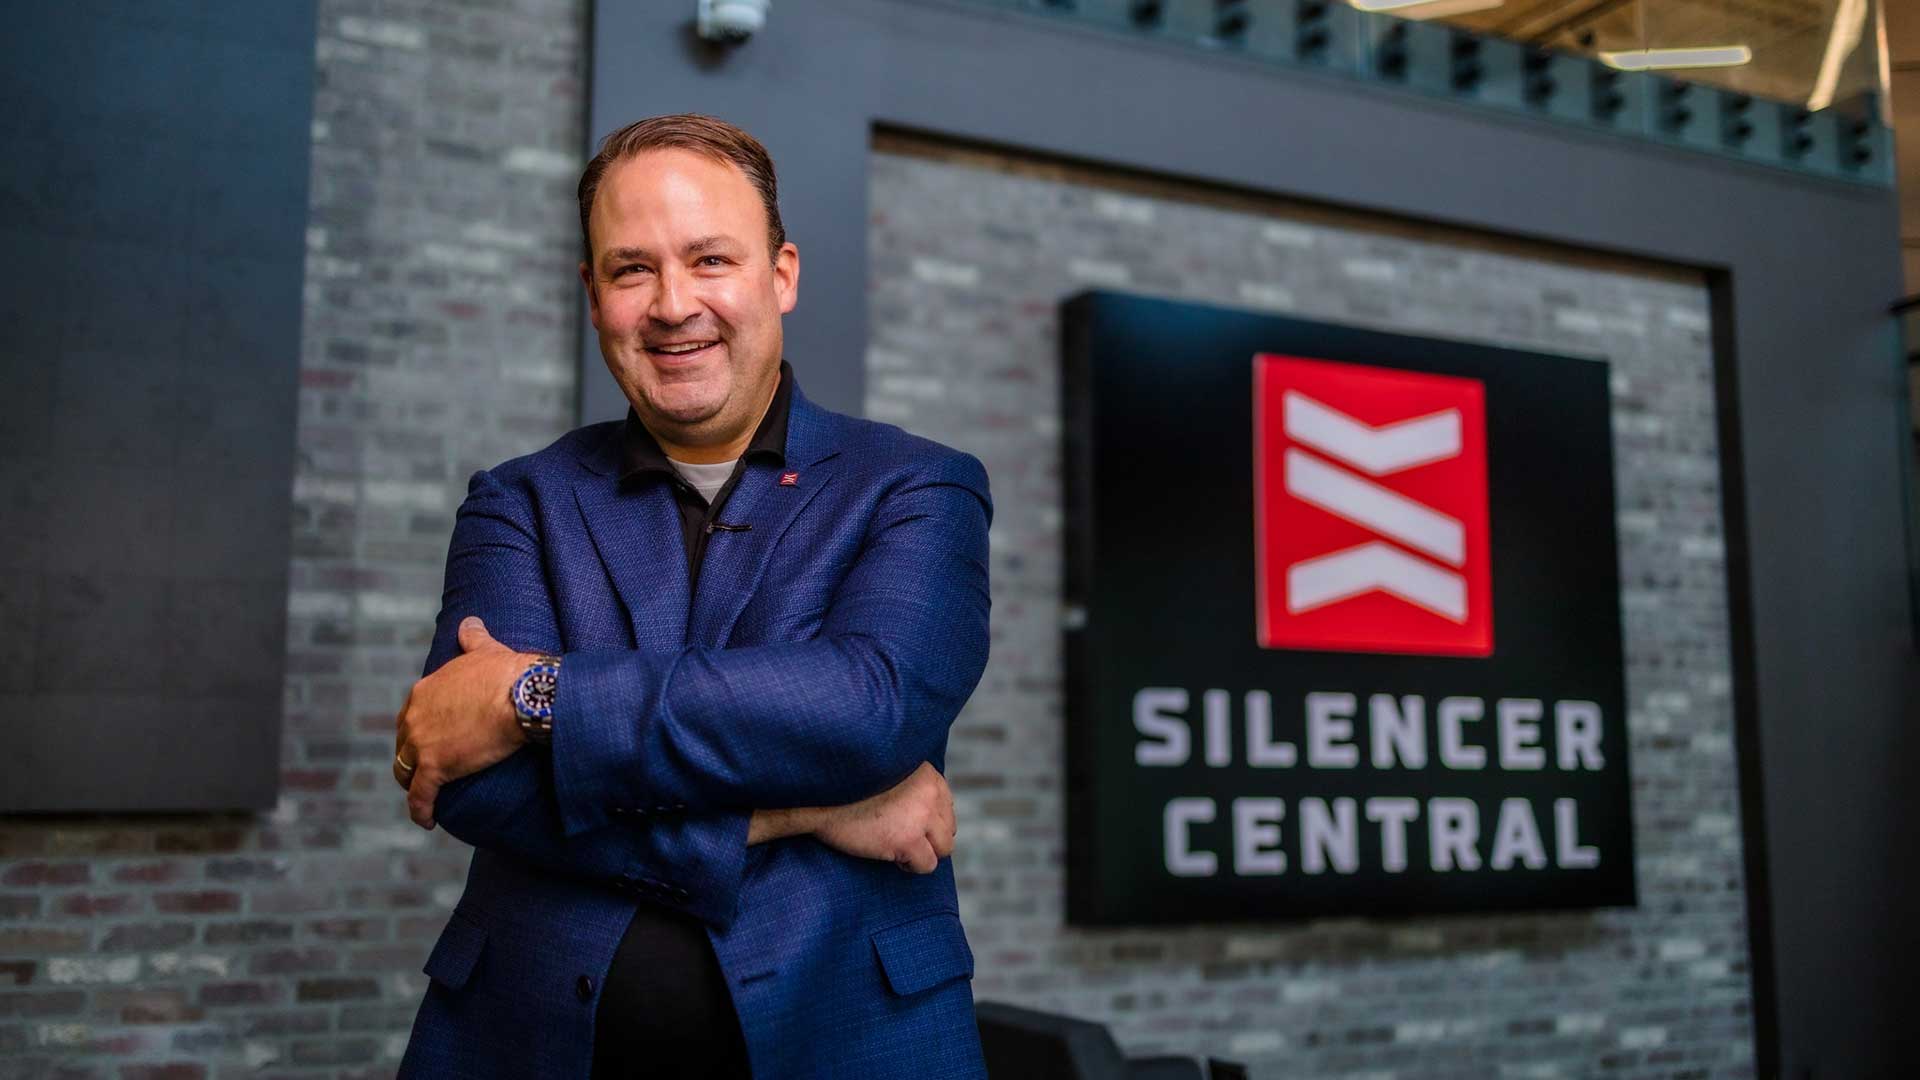 Brandon Maddox pictured inside the Silencer Central headquarters in Sioux Falls, South Dakota.